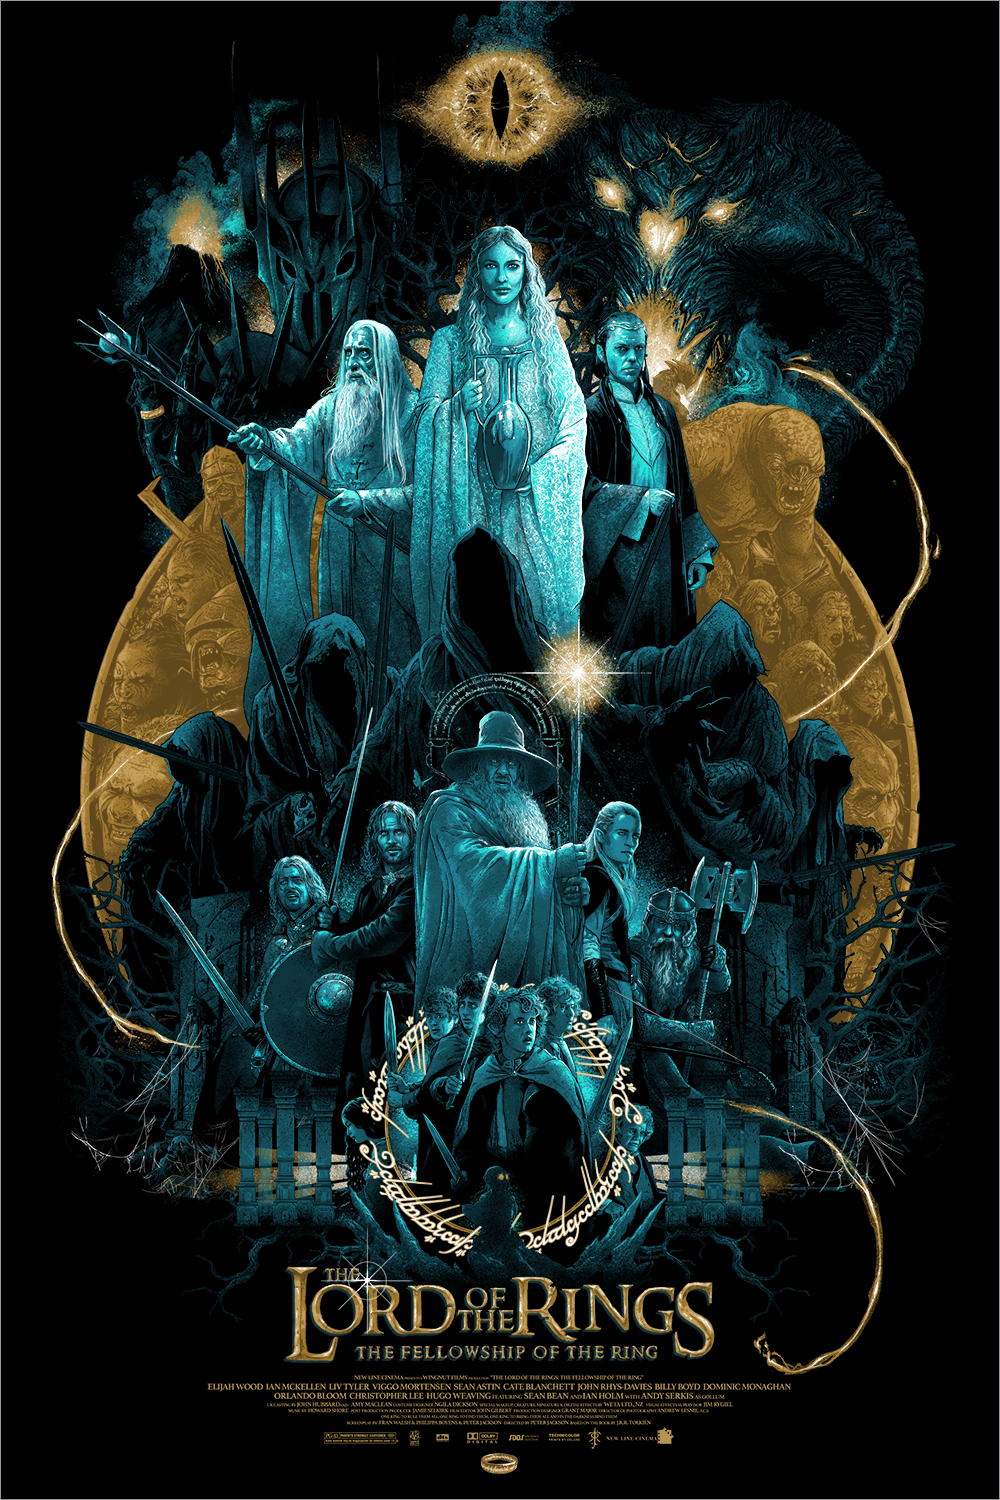 "The Ruling Ring" by Vance Kelly LOTR Screen Print